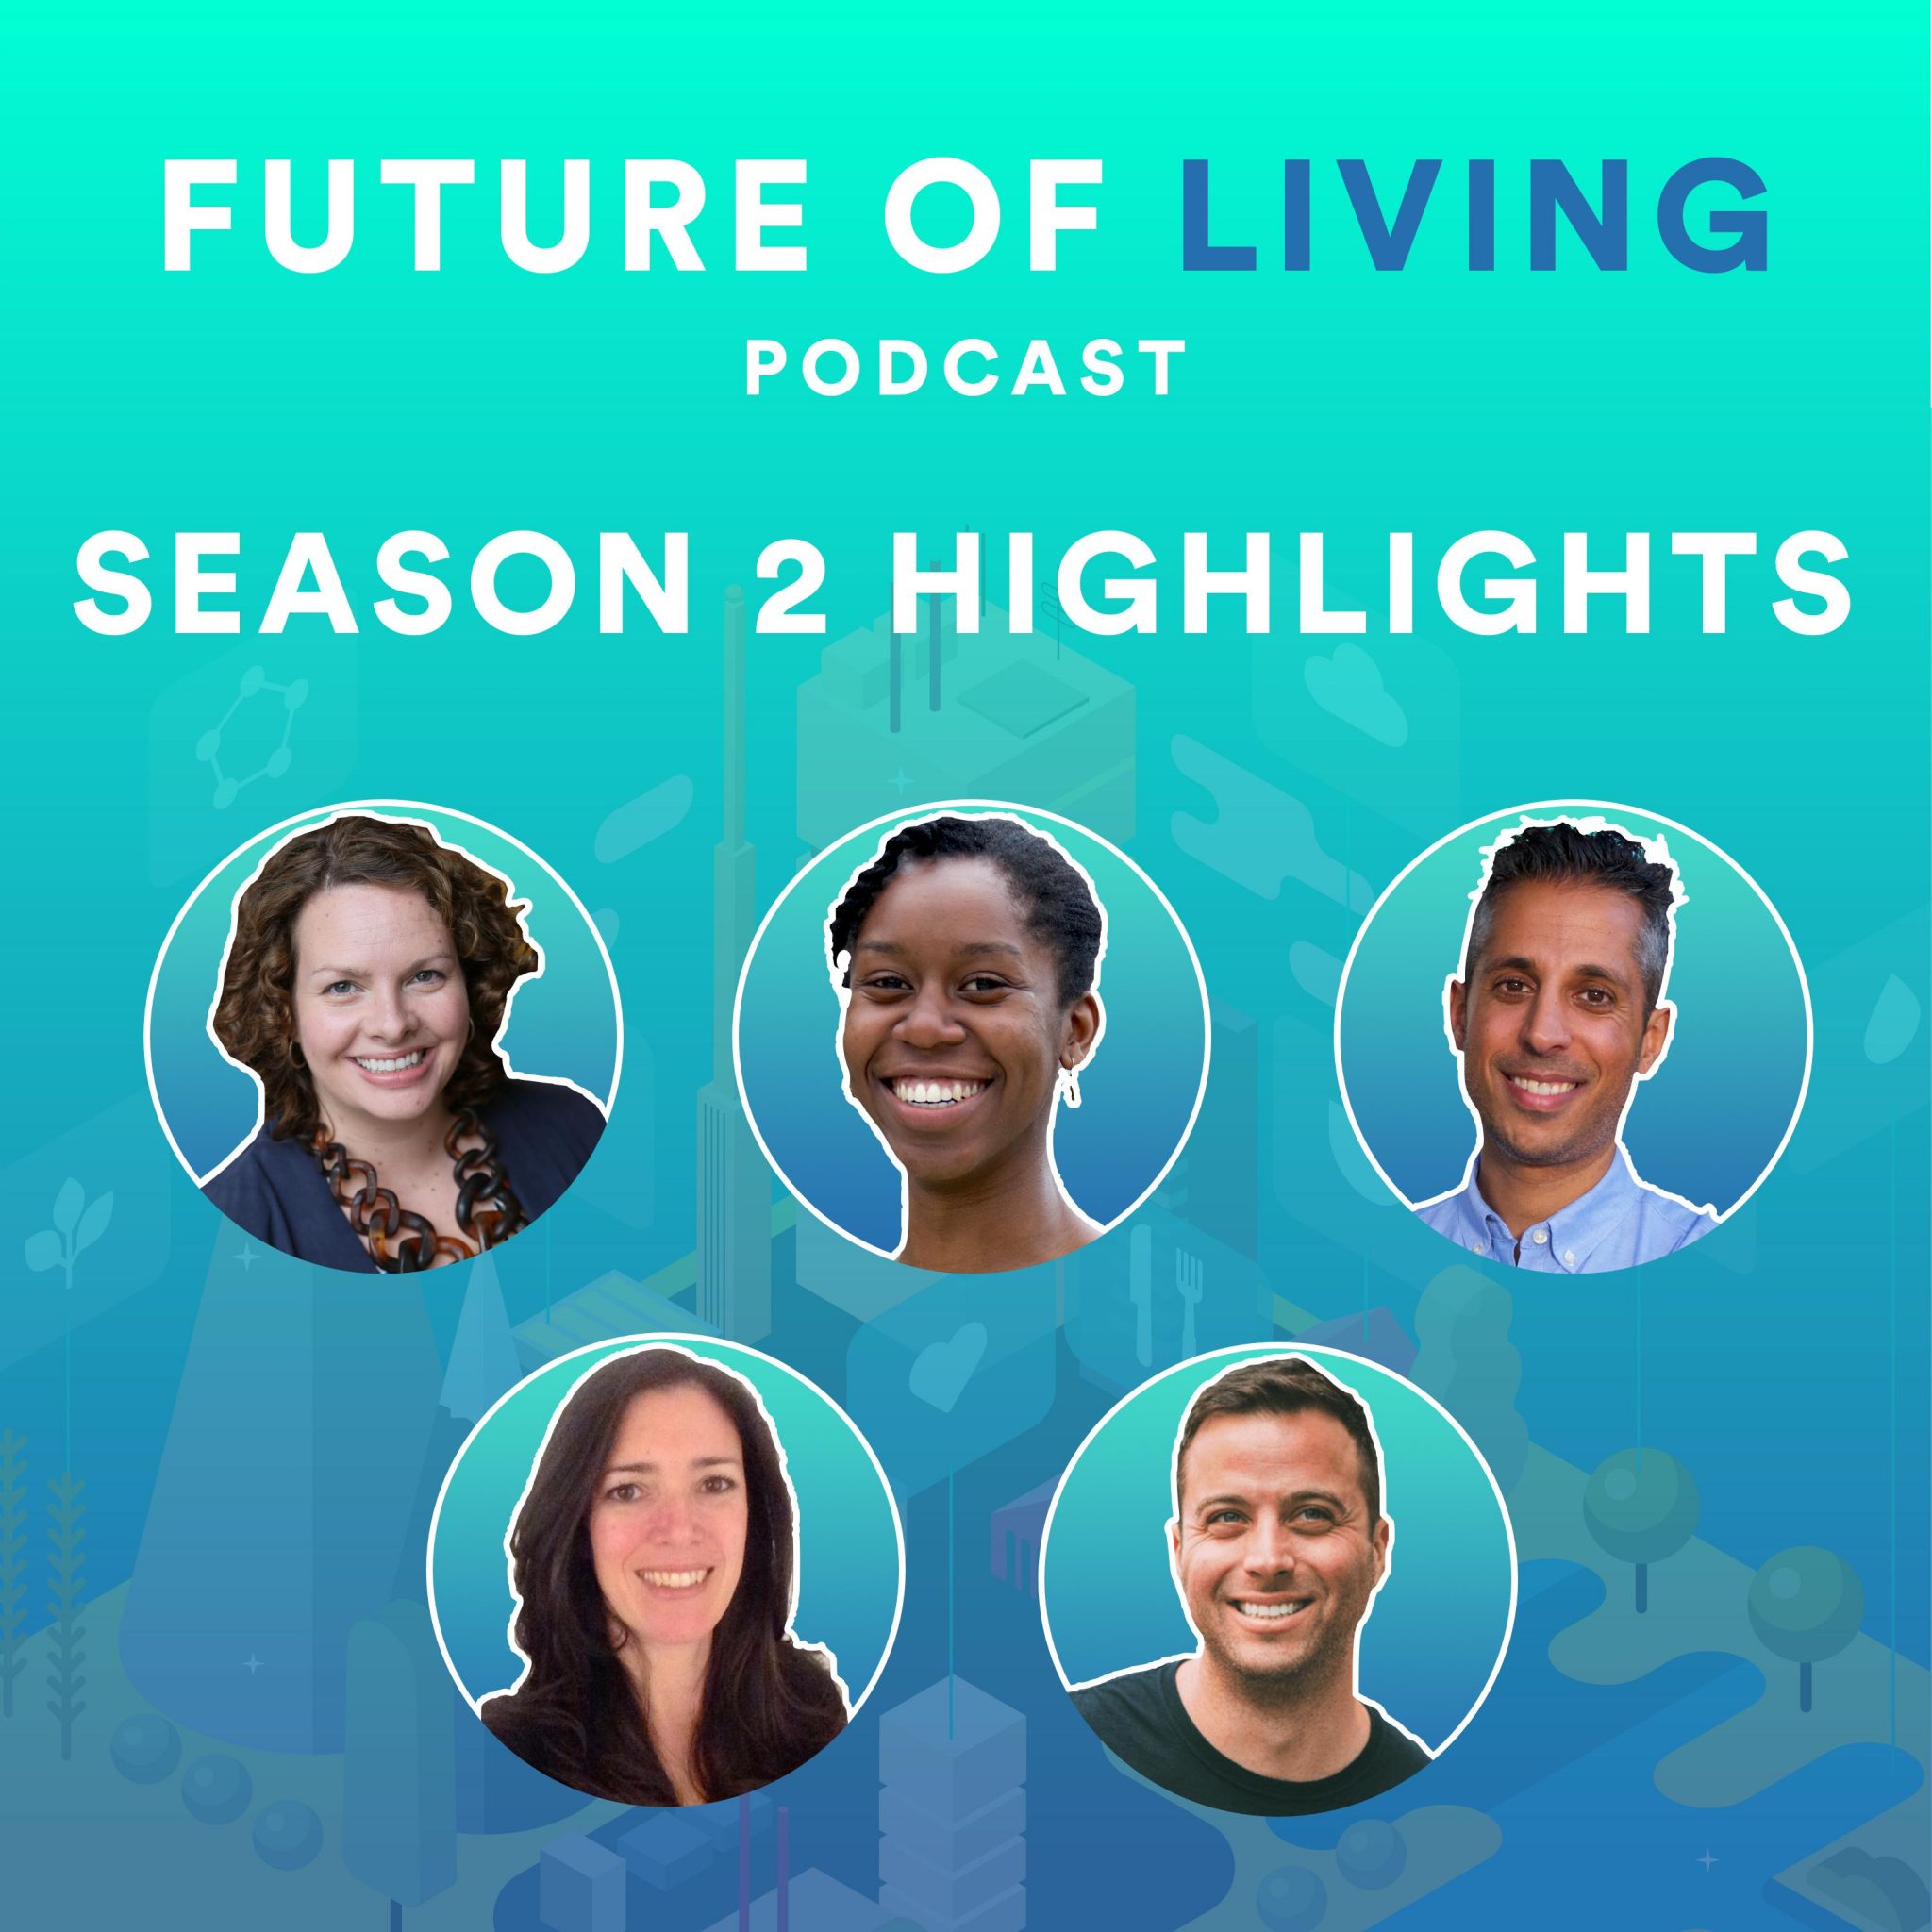 The Future of Living Podcast with Blake Miller Season 2 Highlights